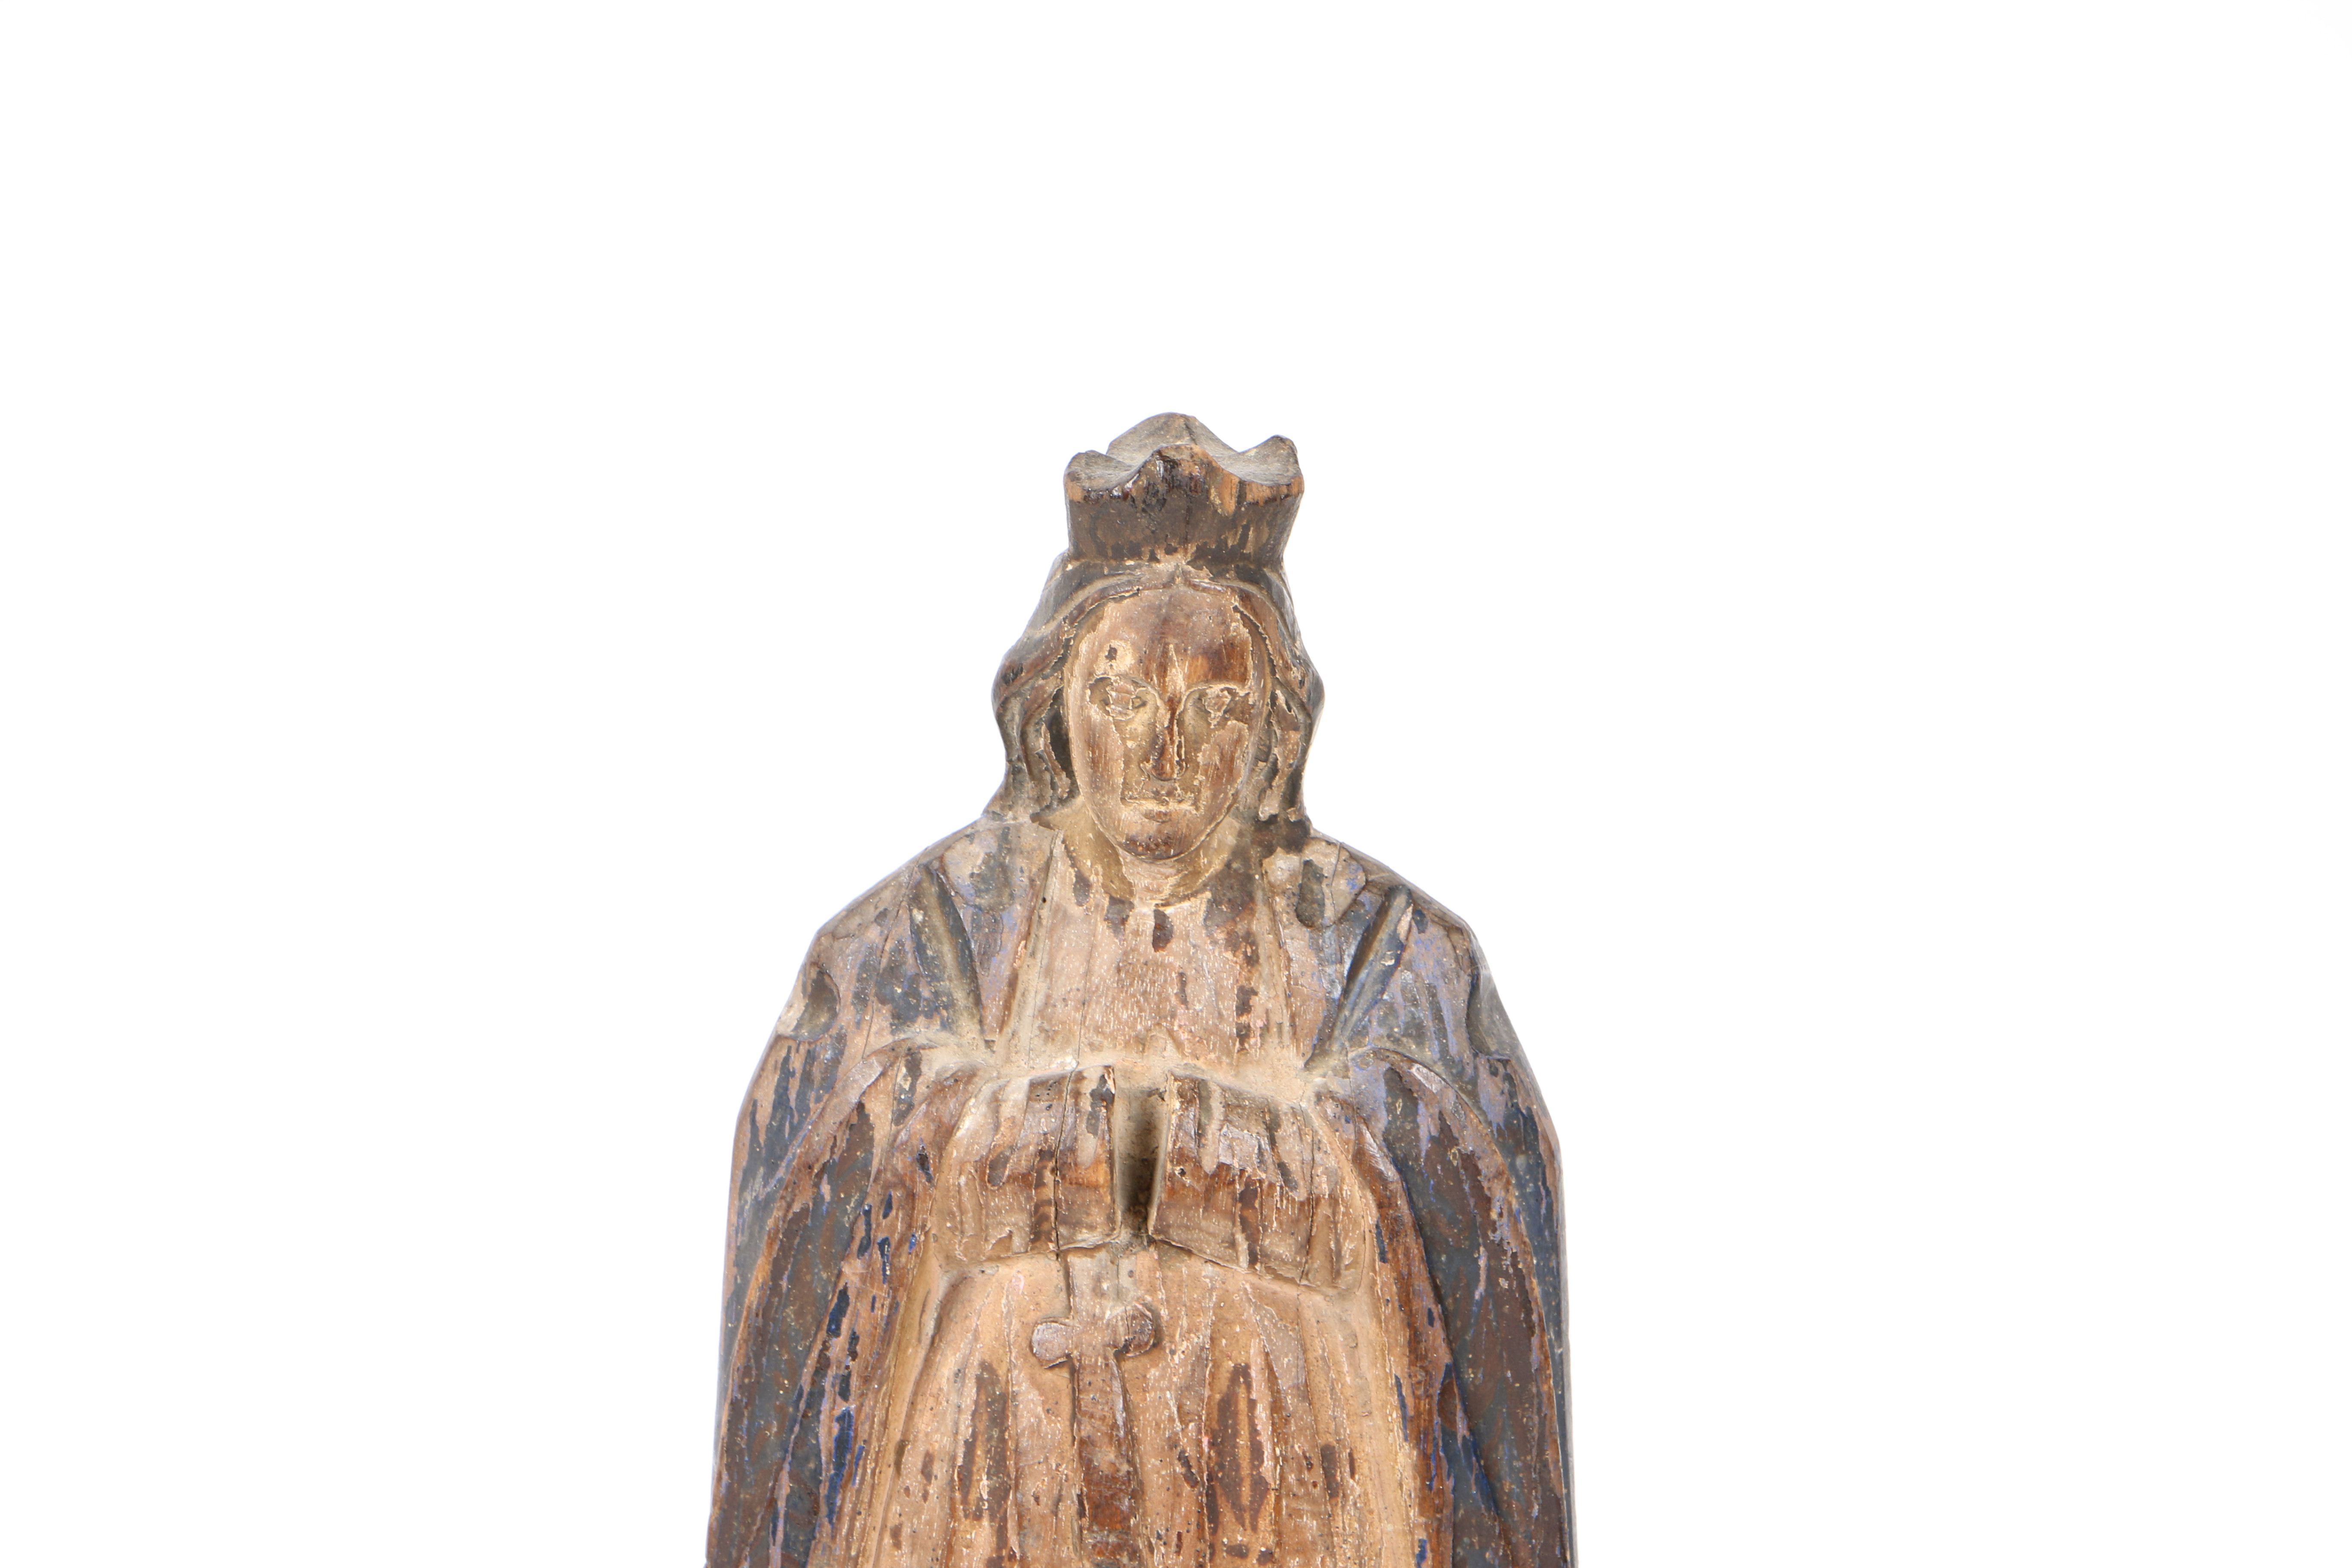 A LATE 17TH/18TH CENTURY SPANISH COLONIAL POLYCHROME CARVED WOOD FIGURE OF SAINT HELEN WITH SWORD. - Image 2 of 4